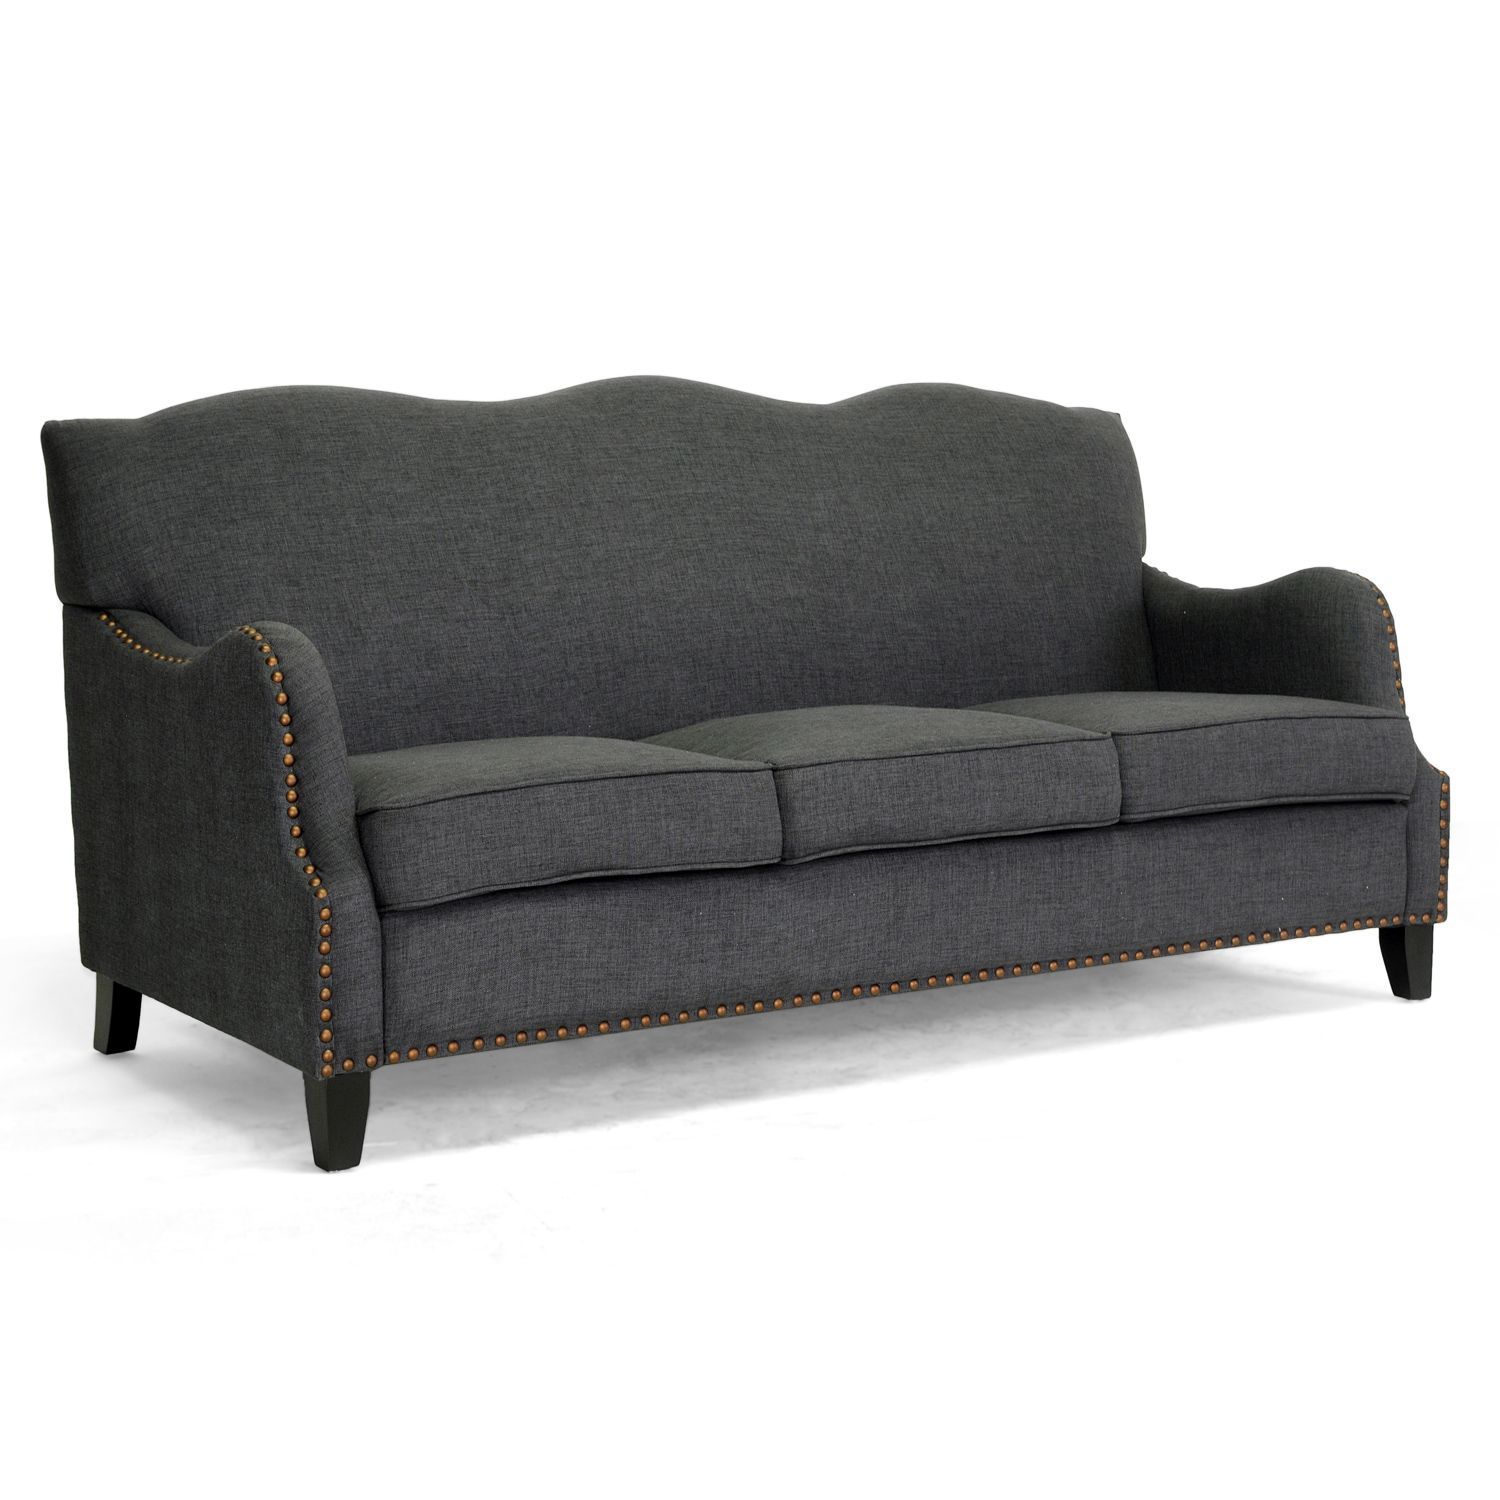 The Dark Charcoal Grey Linen Sofa Features Stylish Curves On The Regarding Gray Linen Sofas (View 18 of 20)